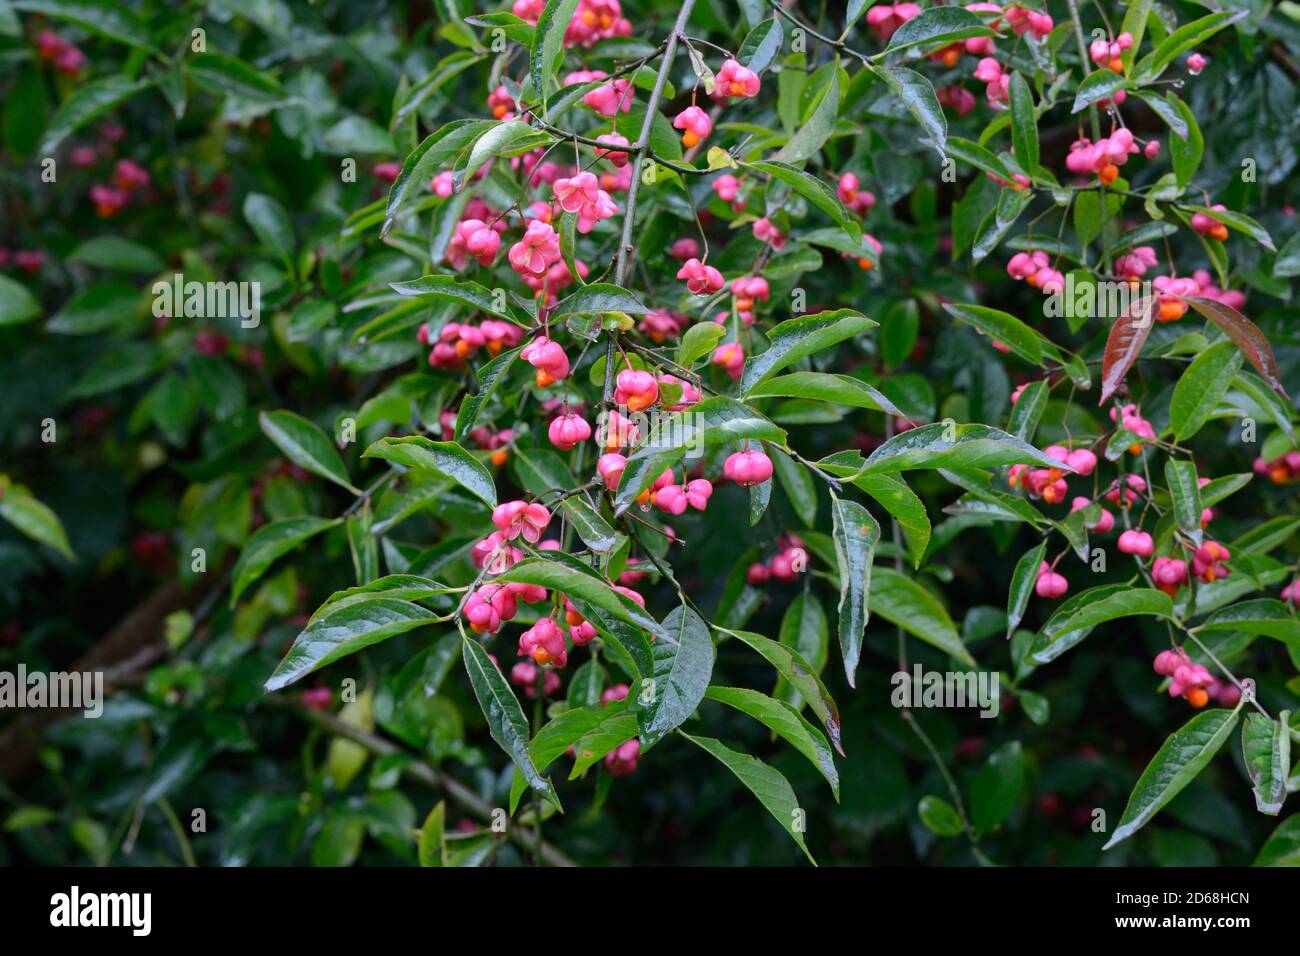 Spindle tree Euonymus europaeus with small yellow flowers followed by four lobed red fruit which split to reveal orange seeds Stock Photo